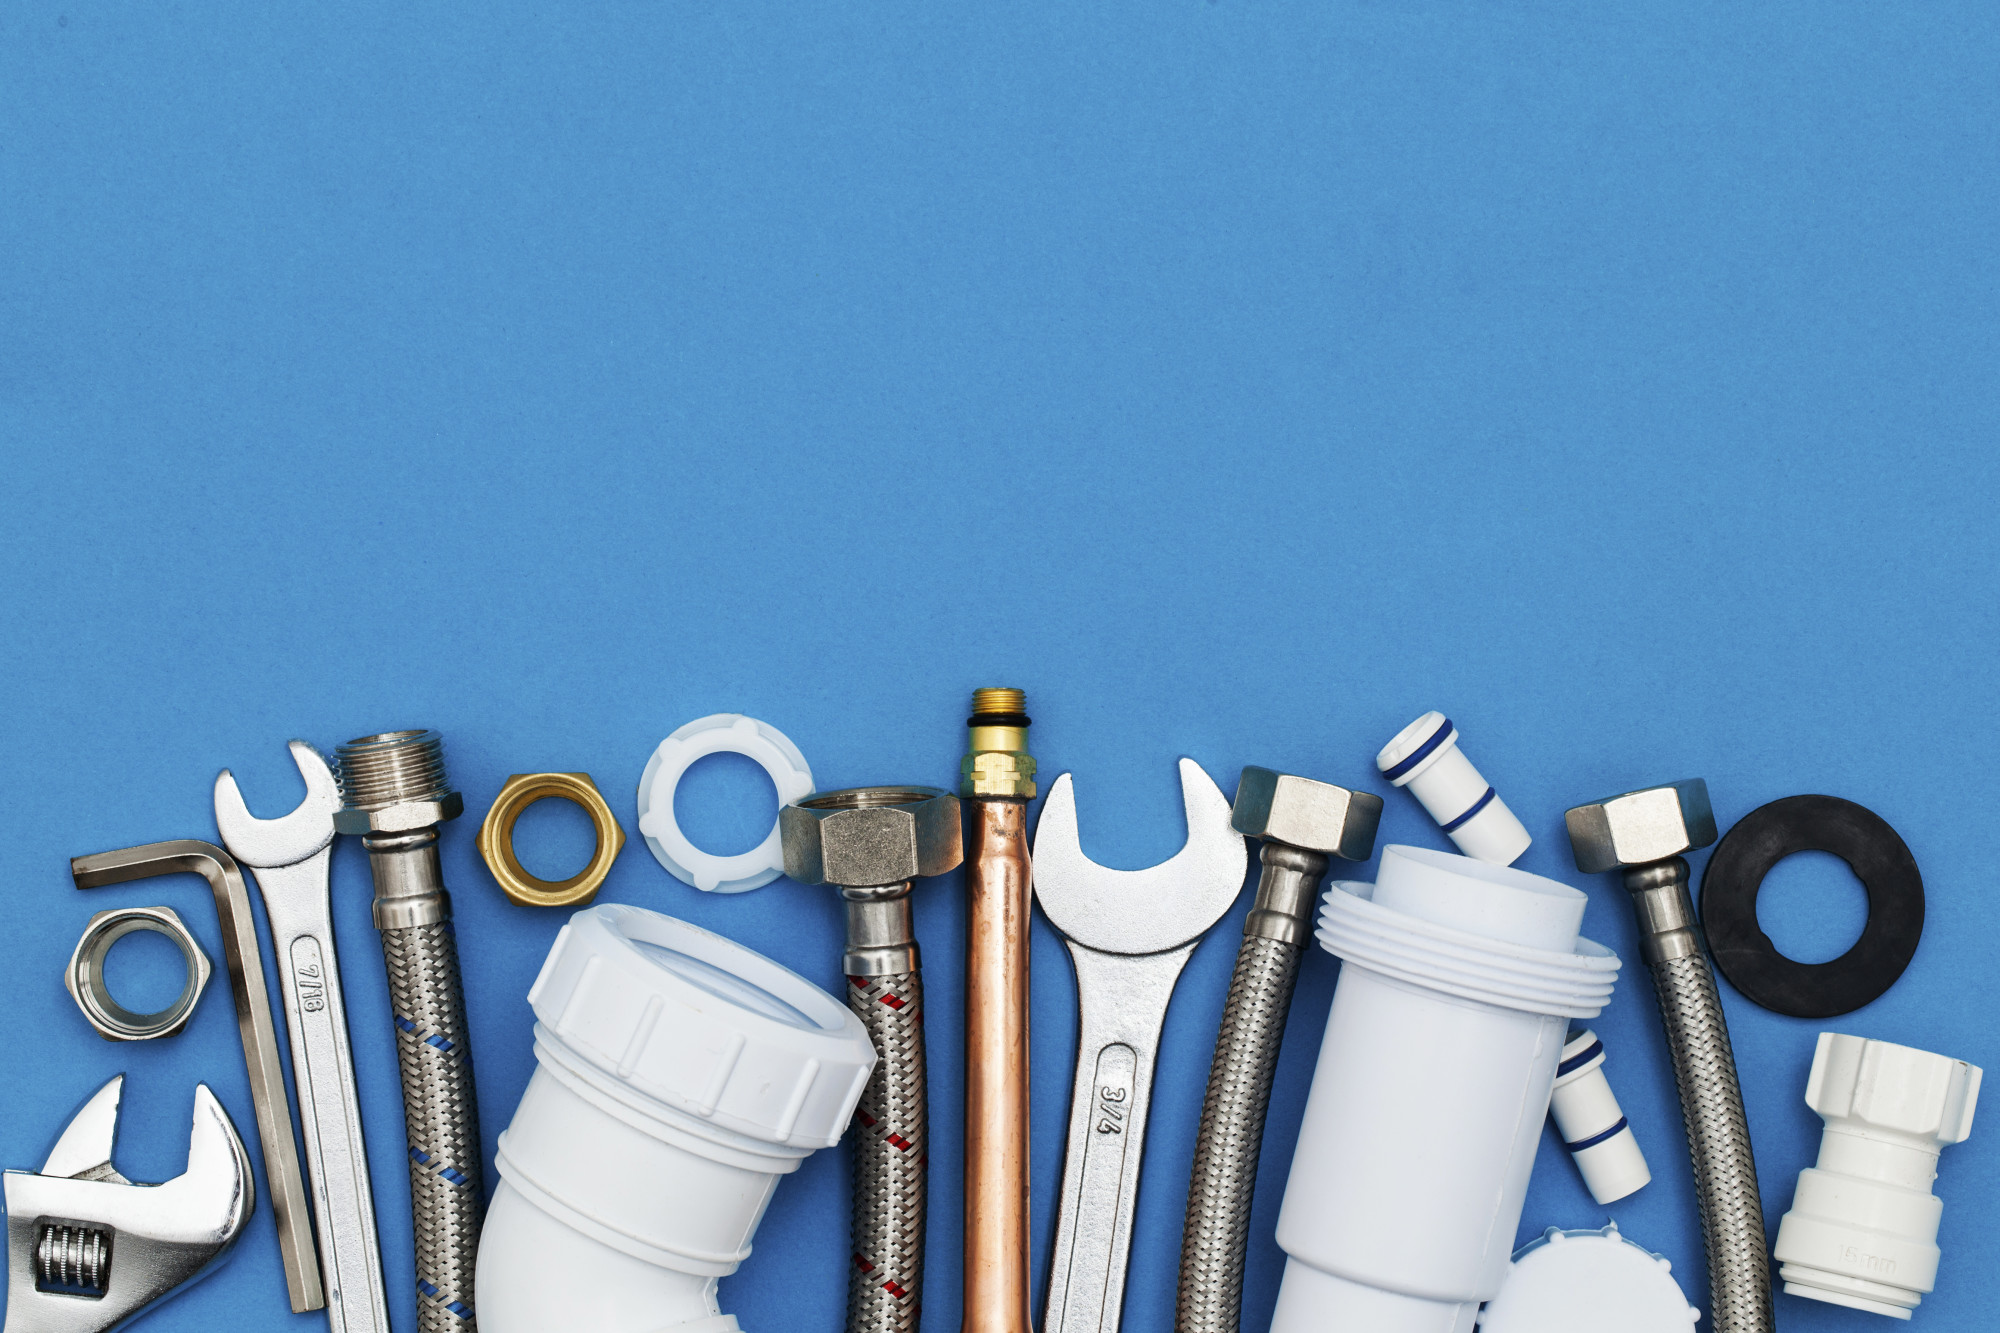 Keeping your home's plumbing system in good condition involves knowing what not to do. Here are residential plumbing maintenance errors and how to avoid them.